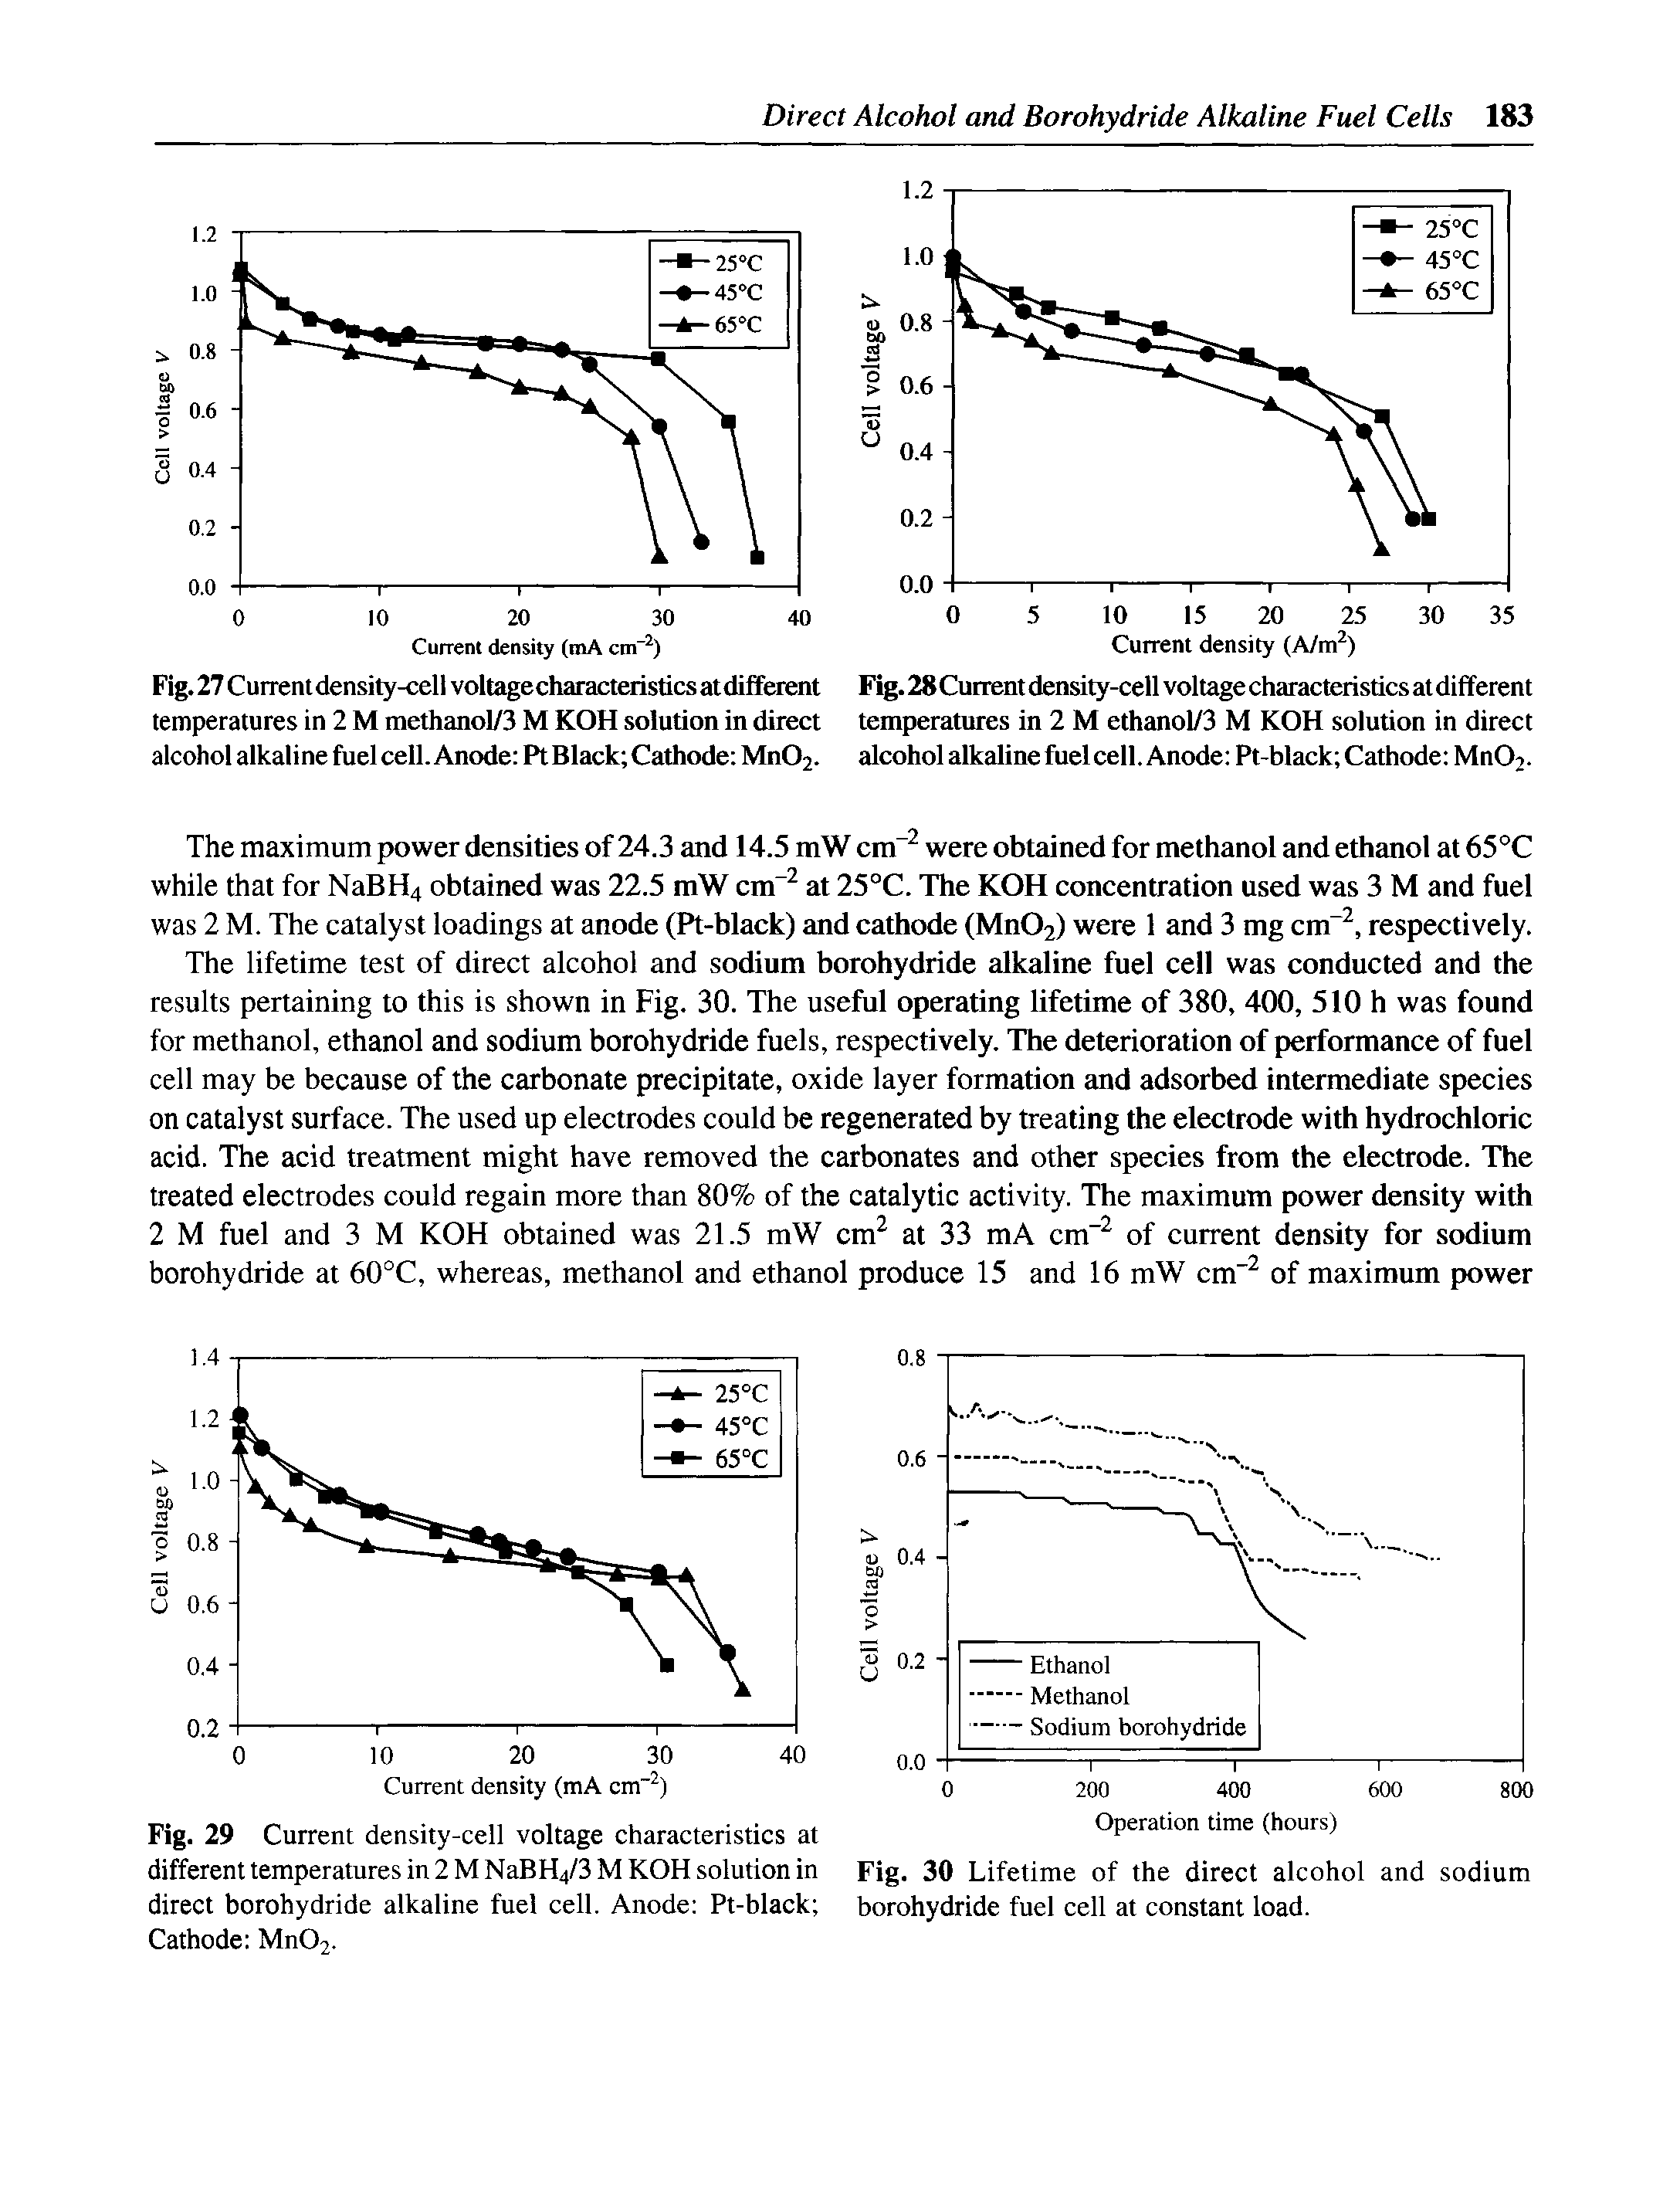 Fig. 30 Lifetime of the direct alcohol and sodium borohydride fuel cell at constant load.